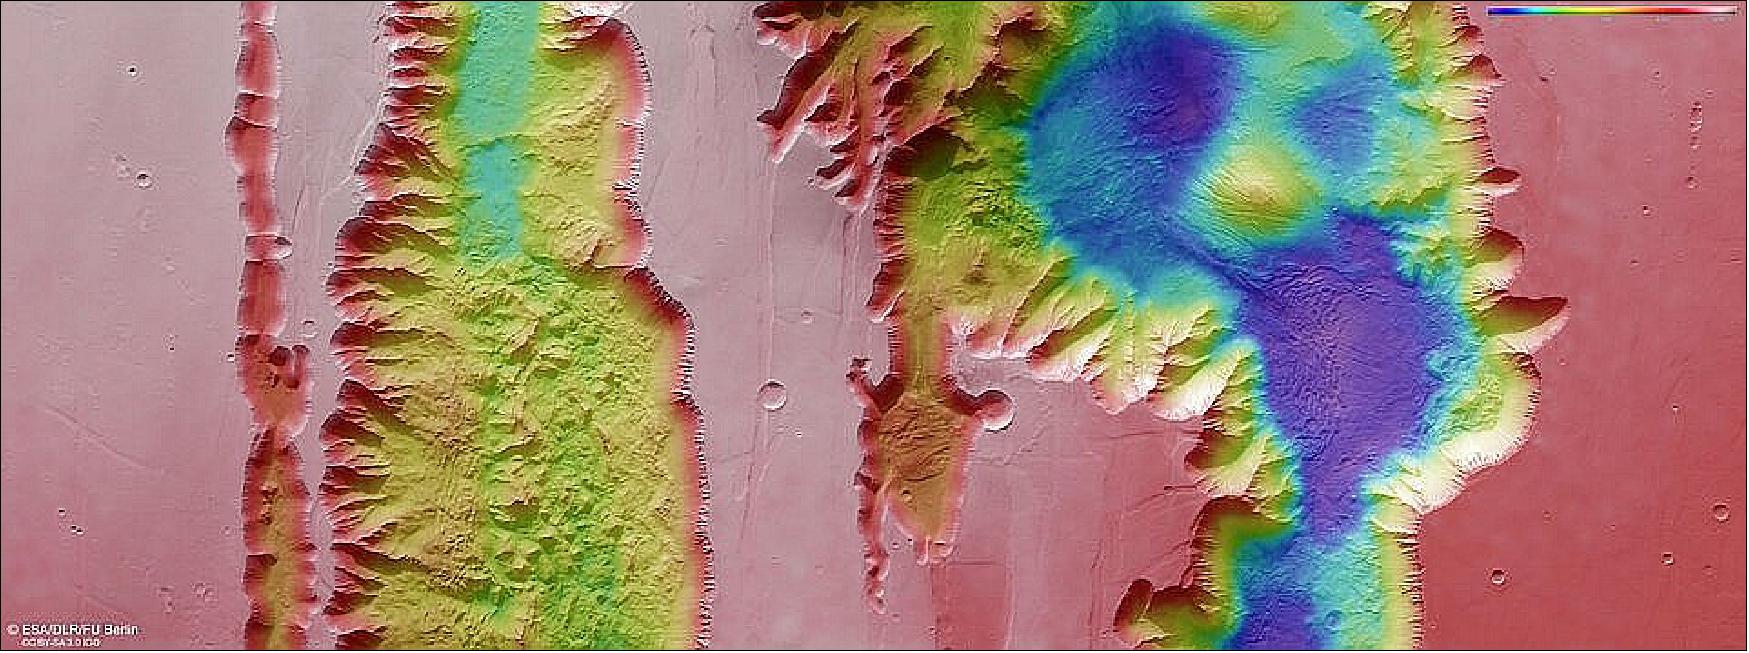 Figure 9: This colour-coded topographic image shows Ius and Tithonium Chasmata, which form part of Mars’ Valles Marineris canyon structure. It was created from data collected by ESA’s Mars Express on 21 April 2022. It is based on a digital terrain model of the region, from which the topography of the landscape can be derived. Lower parts of the surface are shown in blues and purples, while higher altitude regions show up in whites and reds, as indicated on the scale to the top right. - North is to the right. The ground resolution is approximately 25 m/pixel and the image is centred at about 272ºE/6ºS (image credit: ESA/DLR/FU Berlin, CC BY-SA 3.0 IGO)